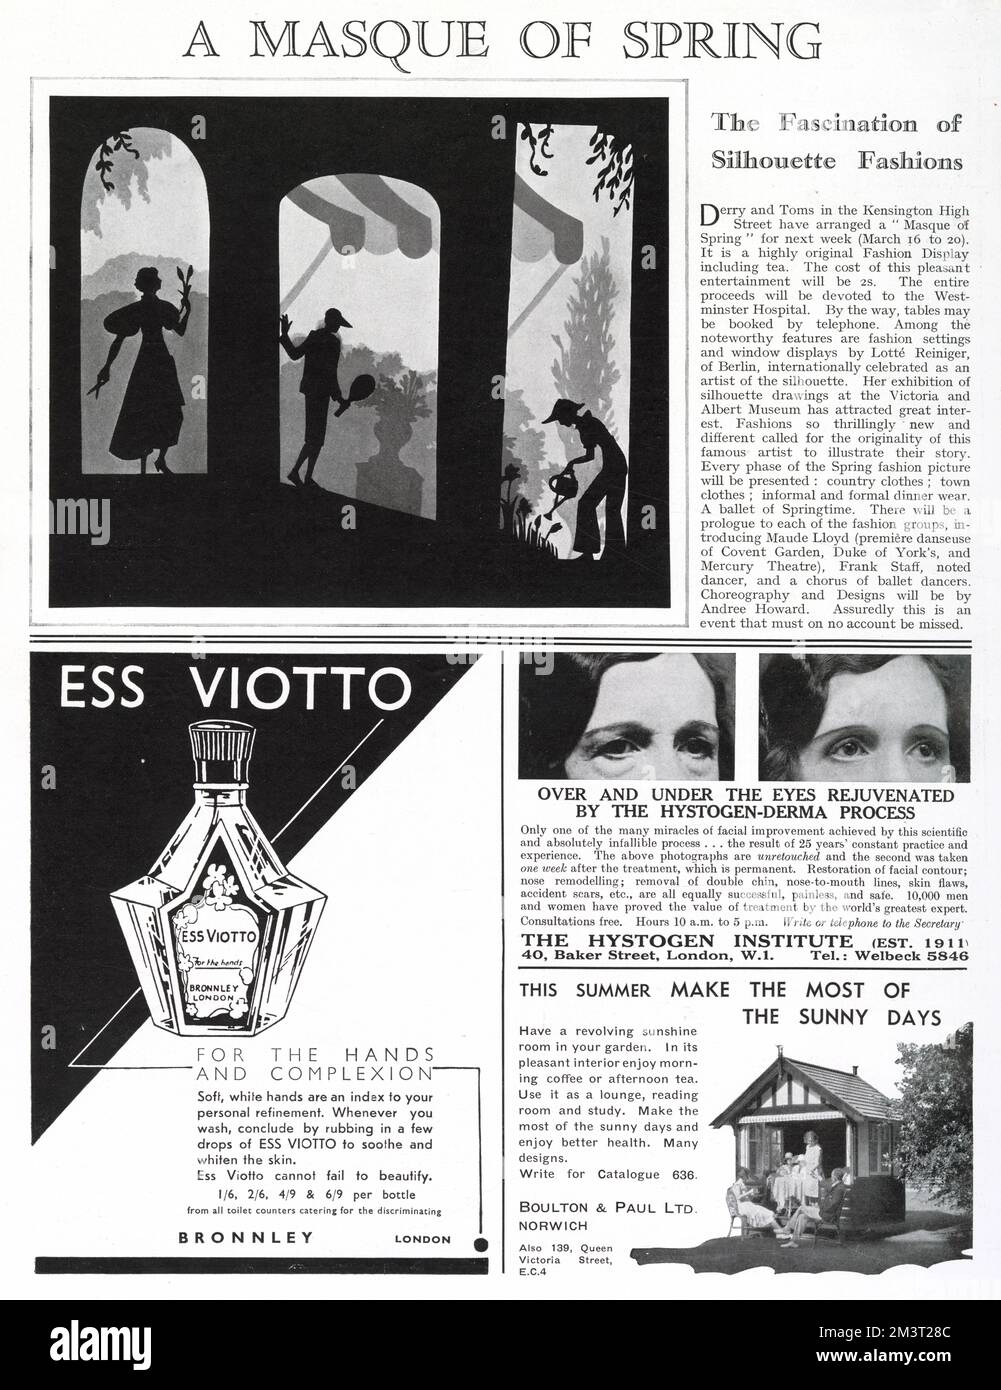 Report in The Tatler about a fashion event for spring fashions with settings and window displays by the German silhouette artist Lotte Reiniger. Stock Photo